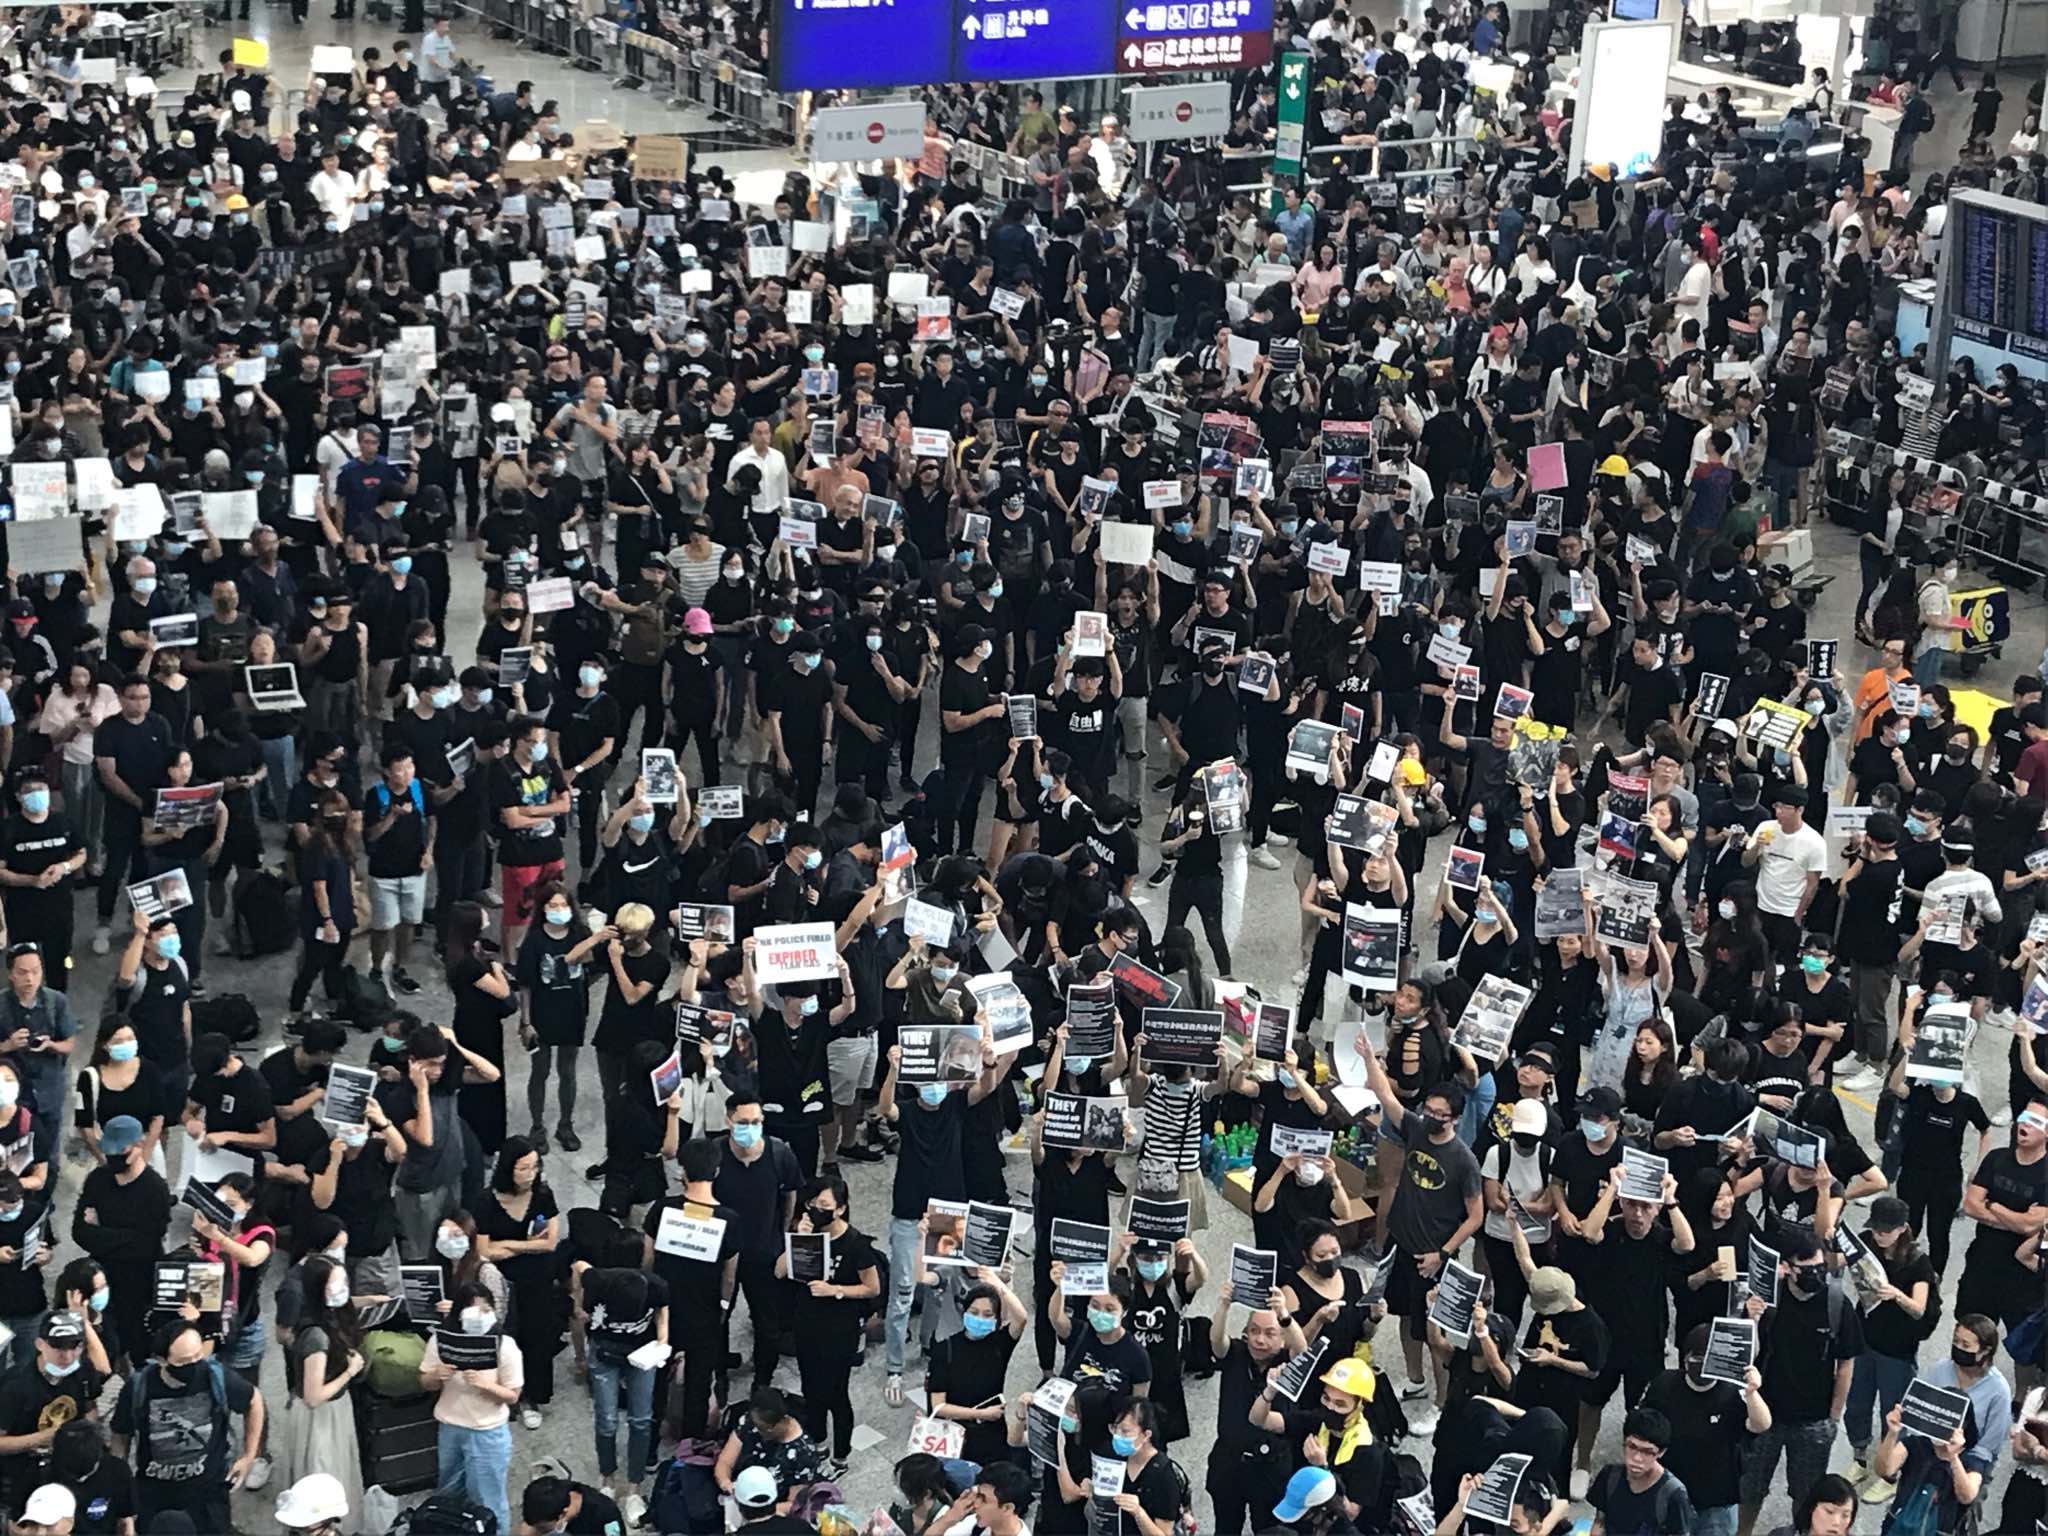 A crowd of protesters at Hong Kong International Airport on Monday. Photo by Cheryl Ho.